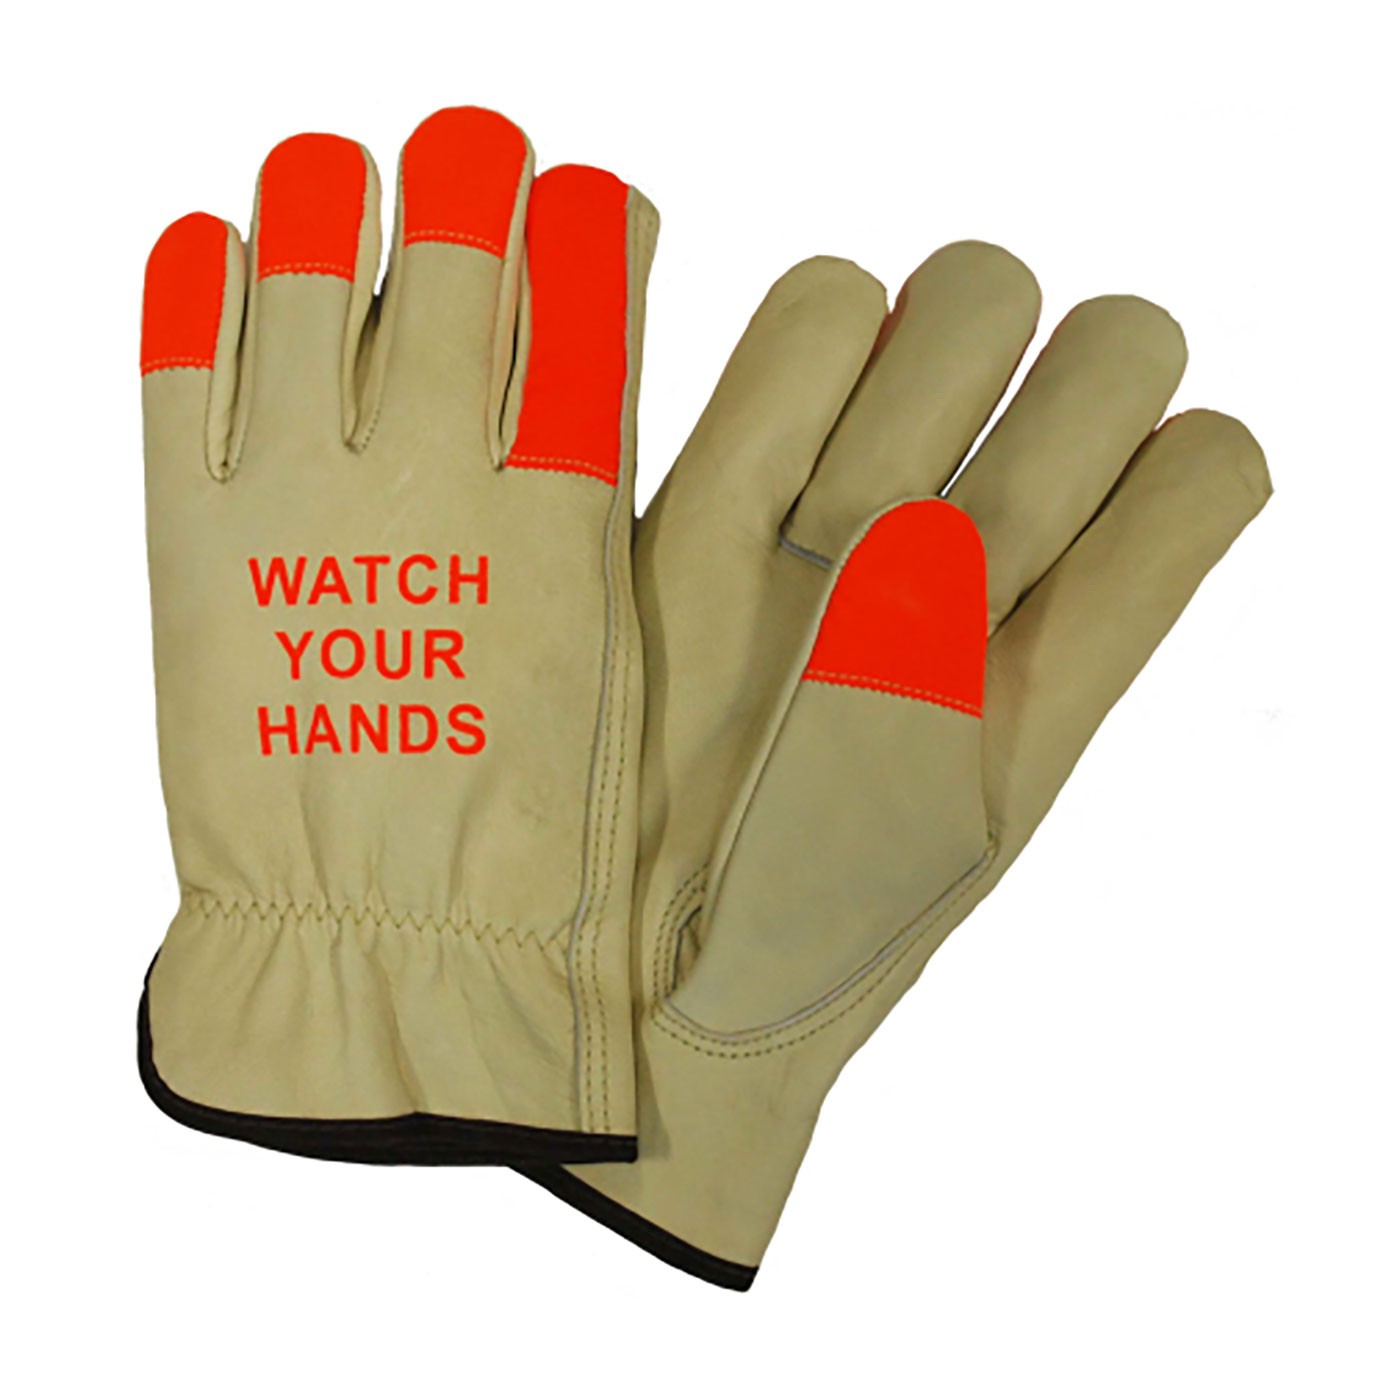 Posi-Therm® Regular Grade Top Grain Pigskin Leather Drivers Glove with Posi-Therm® Linging and Hi-Vis Fingertips - Keystone Thumb  (#994KOTP)